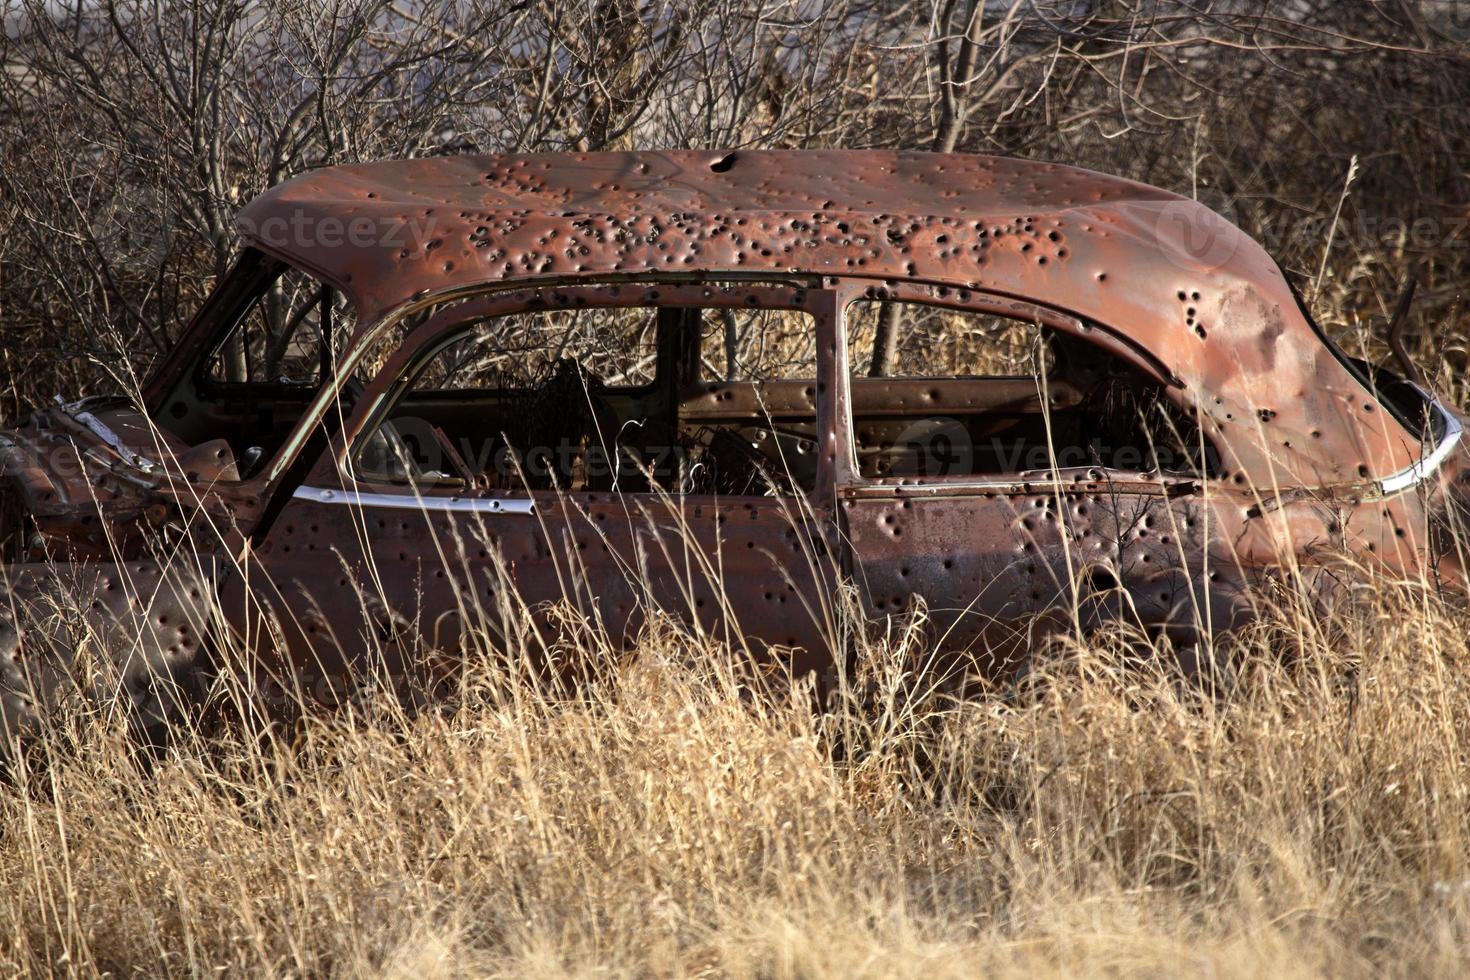 Bullet holes in an abandoned car, photo